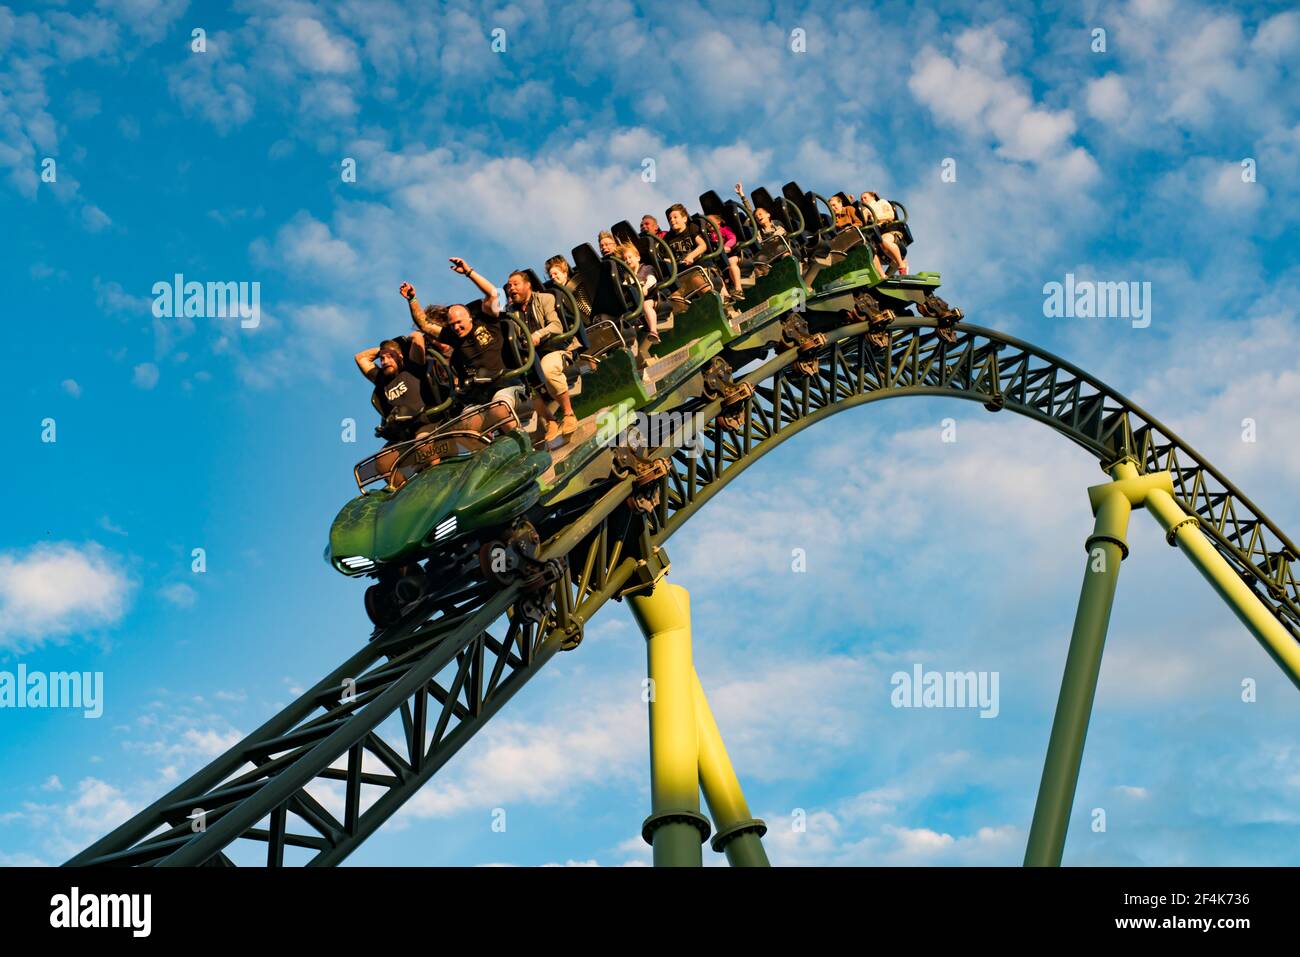 People screaming and holding up hands during roller coaster ride Helix Stock Photo